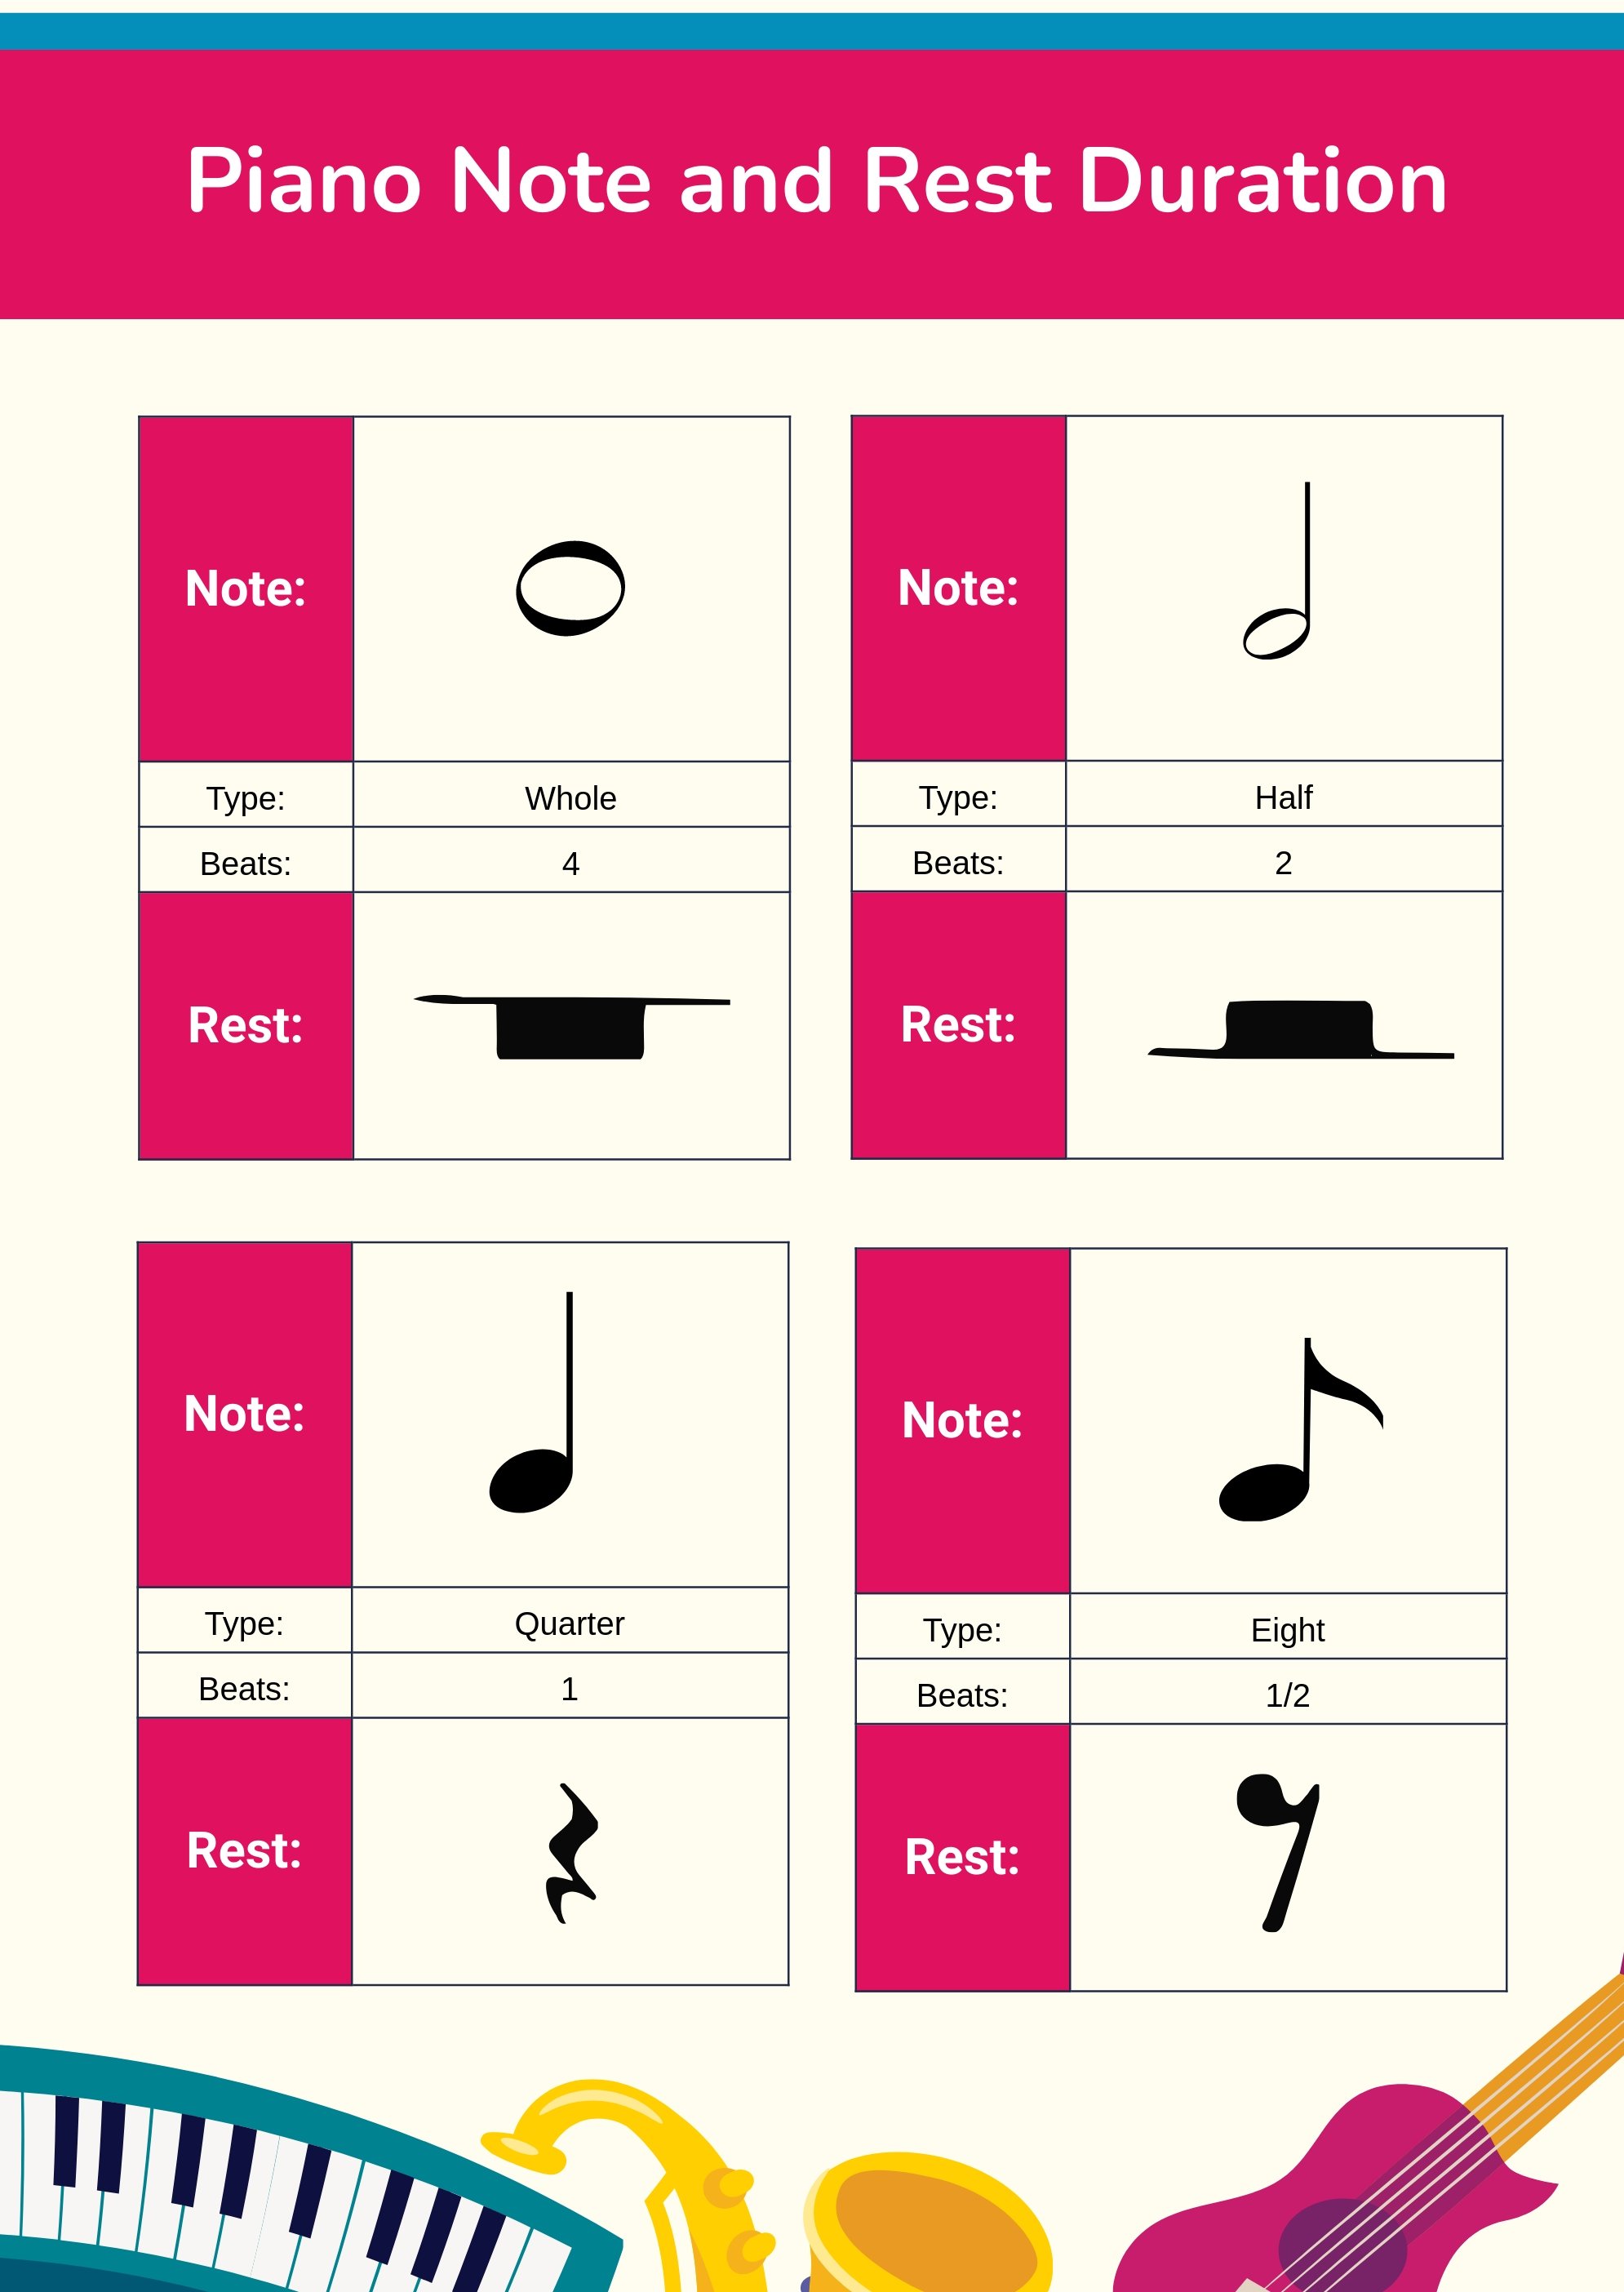 Piano Music Note Duration Chart